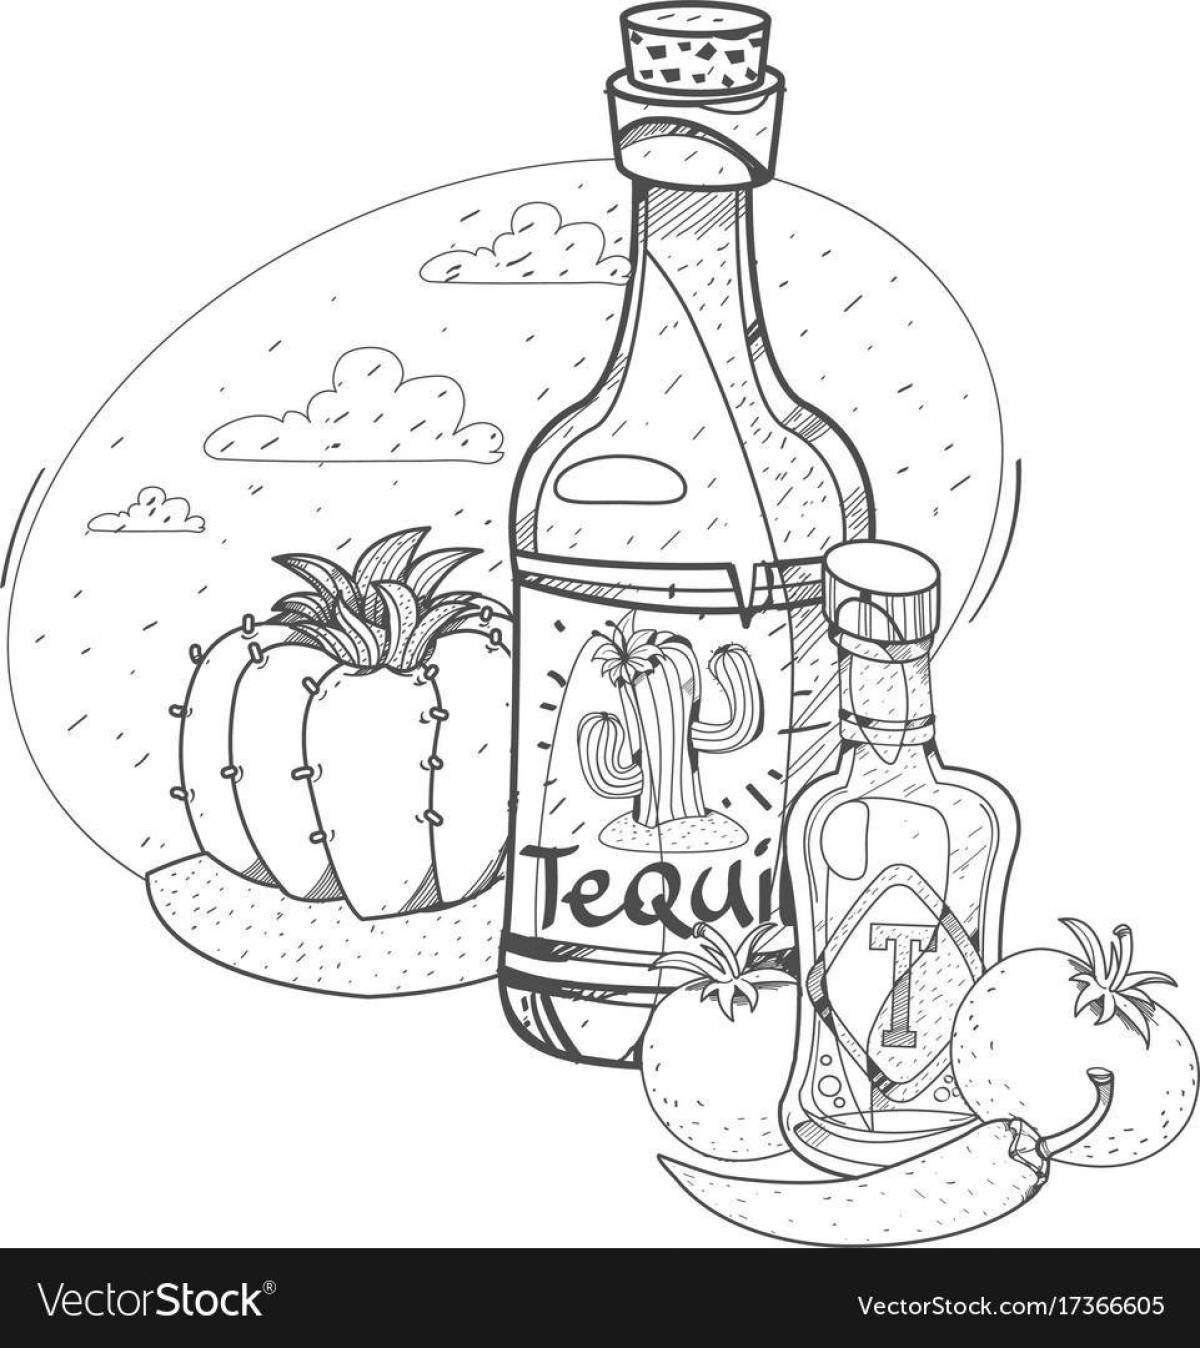 Salty sauce coloring page